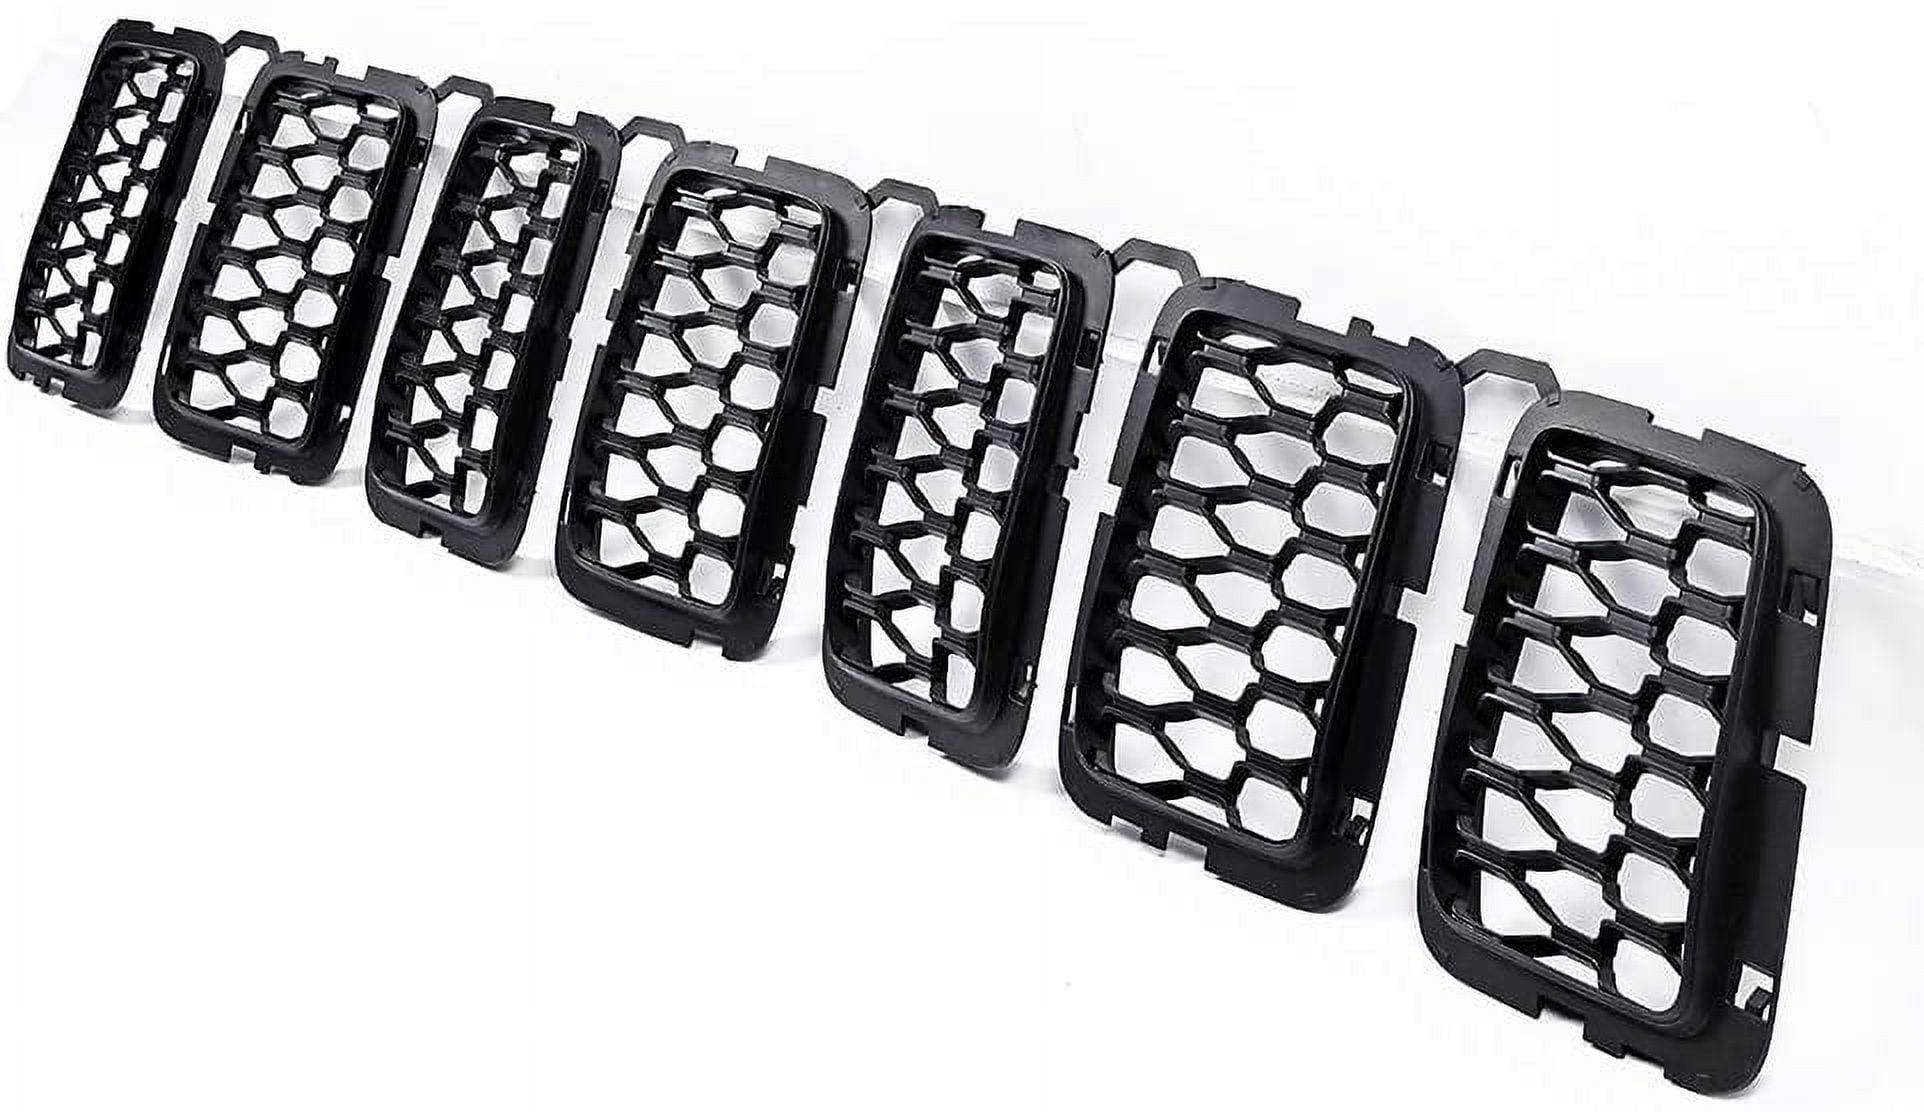 XBEEK Matte Black Honeycomb Front Grill Inserts Mesh Grille Fits